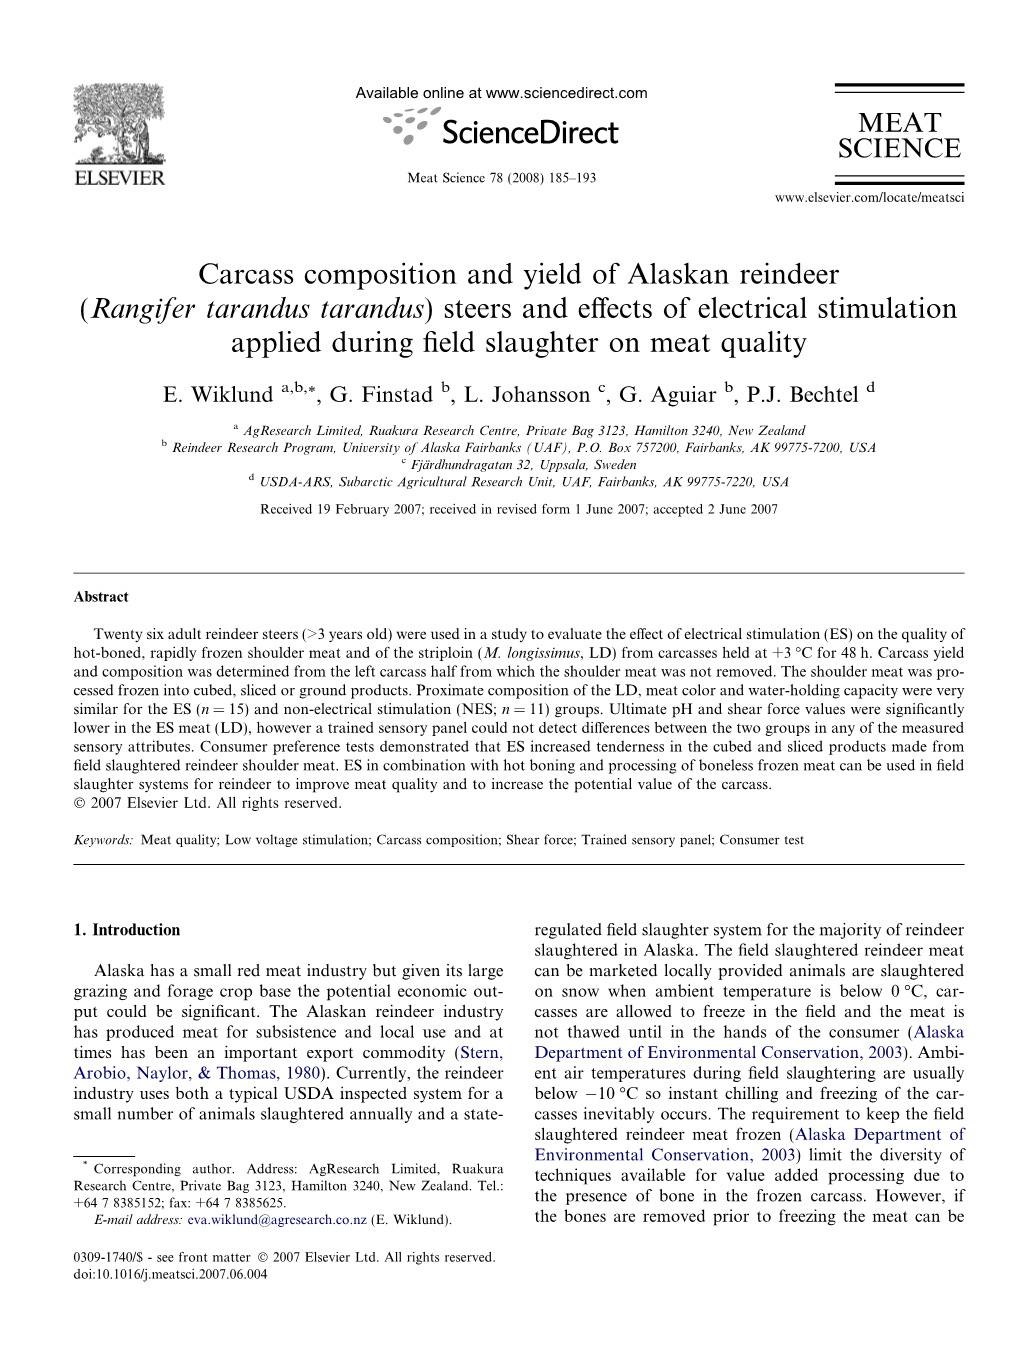 Carcass Composition and Yield of Alaskan Reindeer